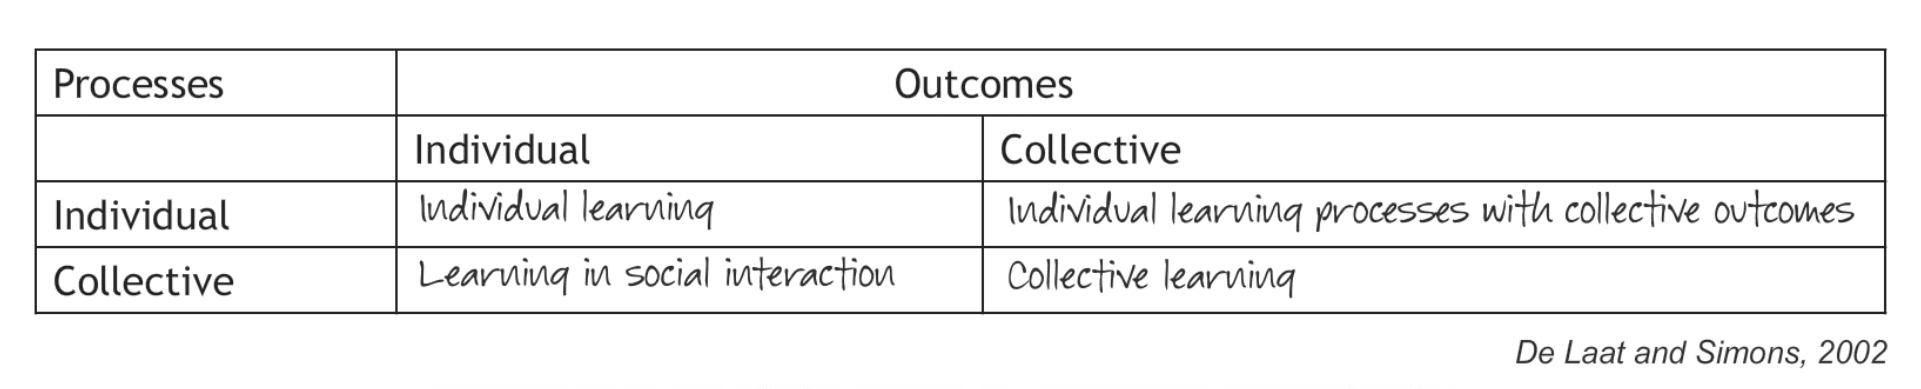 Processes and outcomes (individual vs collective)